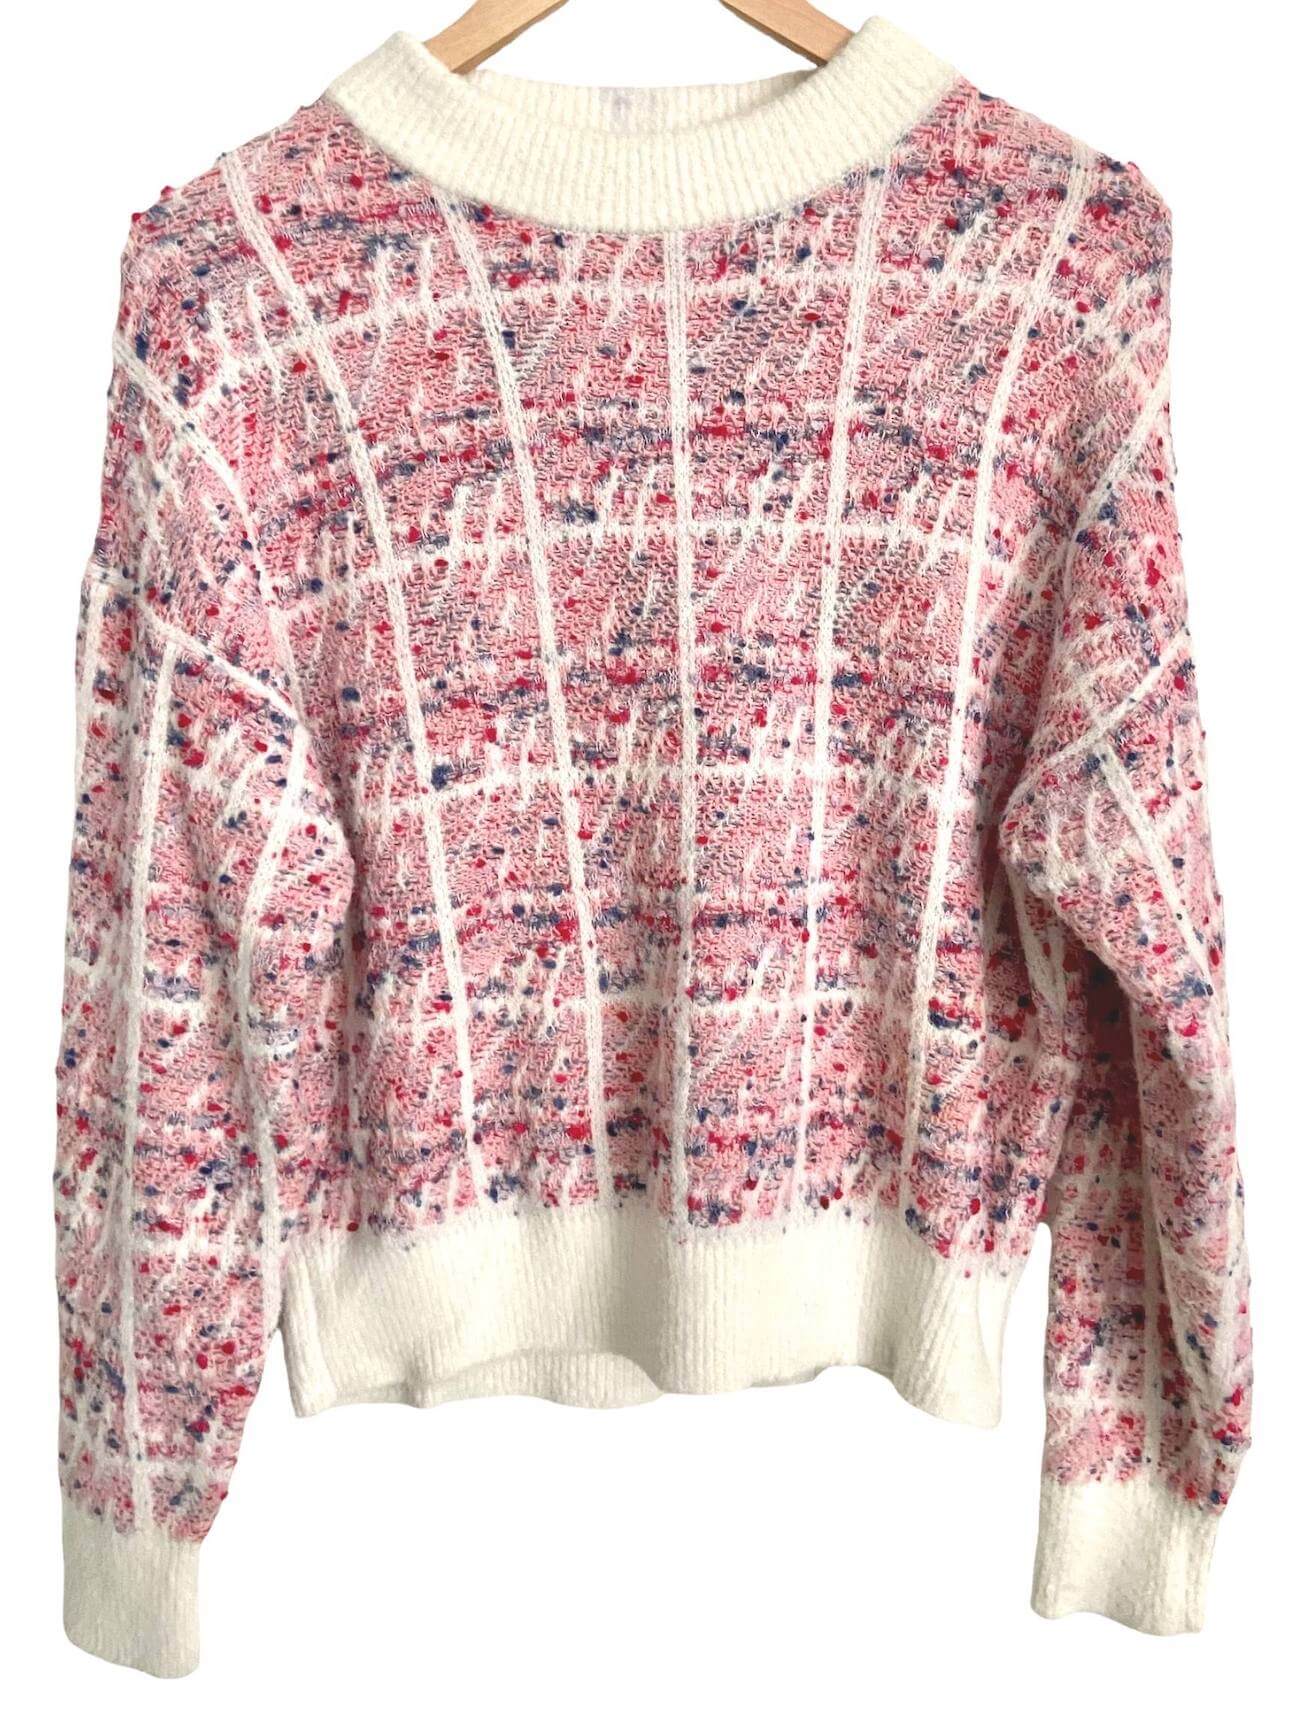 Cool Summer ANN TAYLOR pink and blue sweater